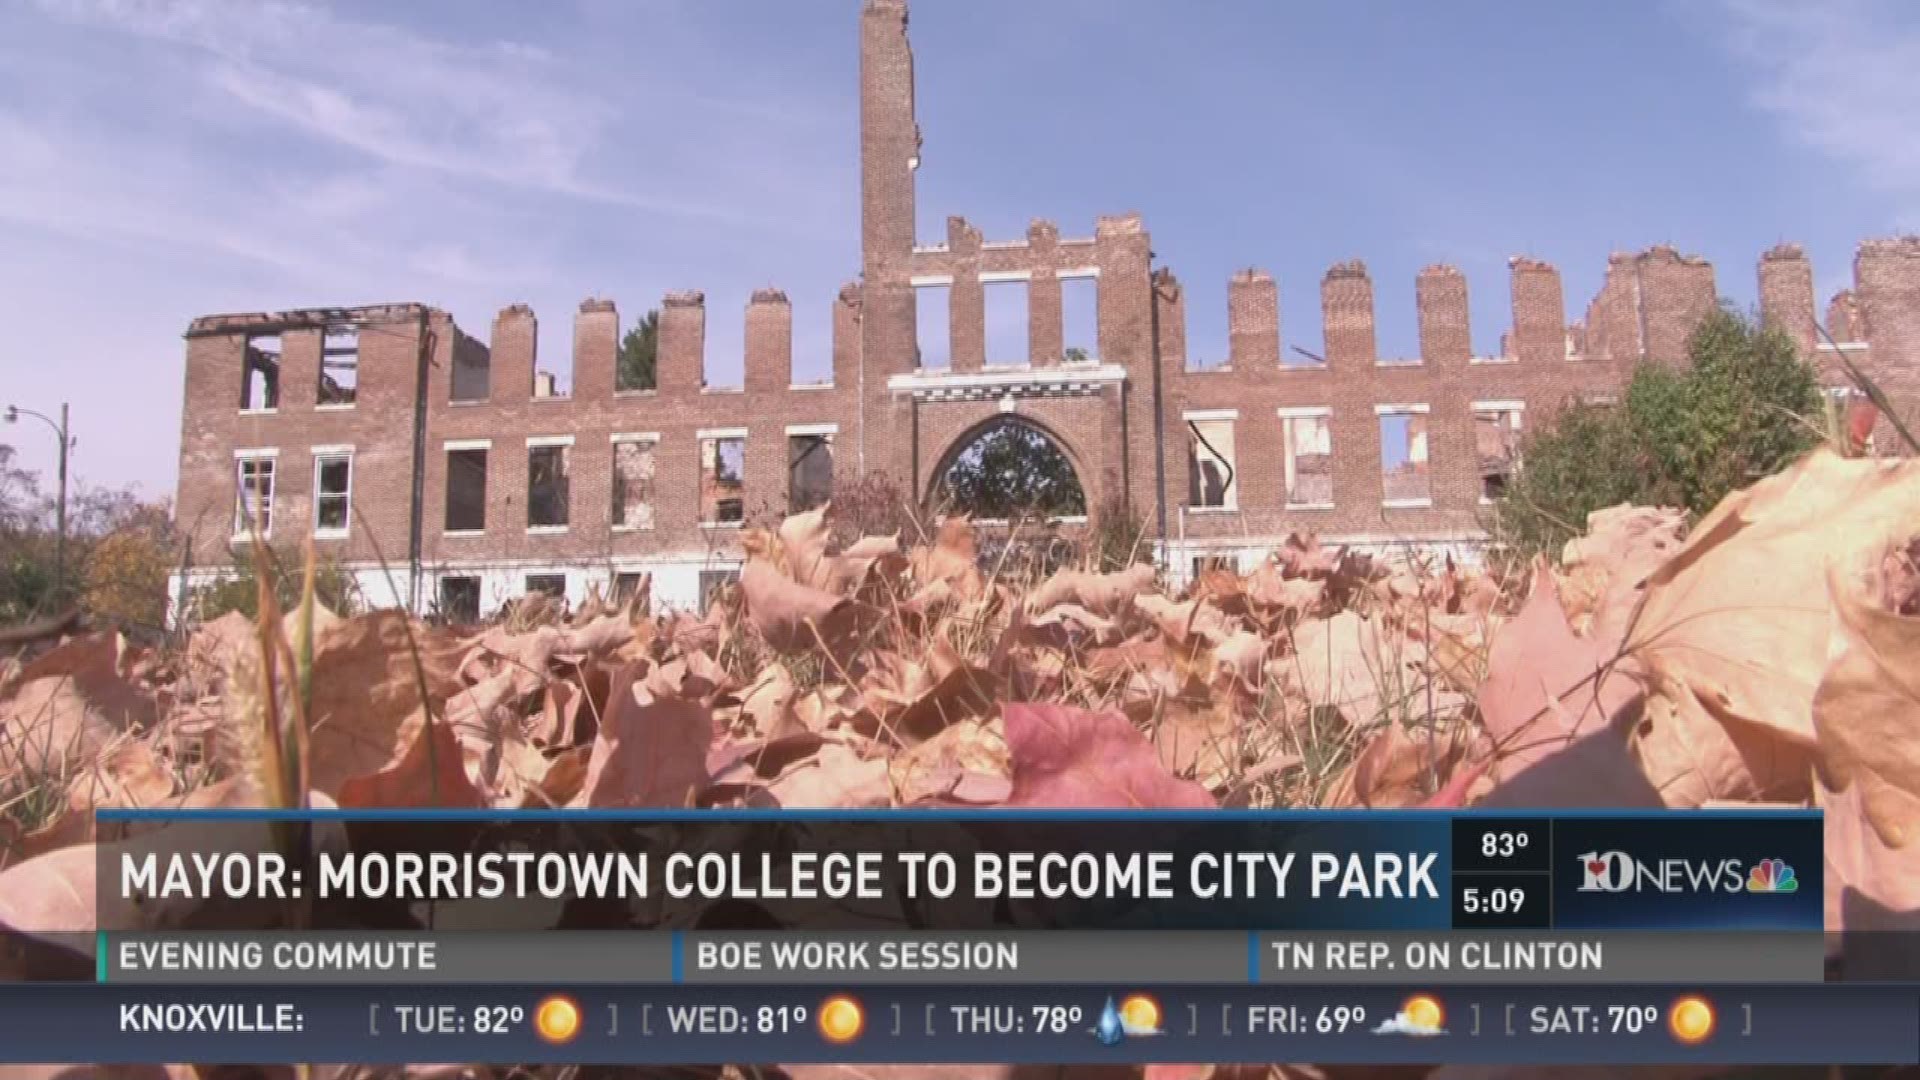 The city of Morristown has agreed to buy the historic Morristown College for $900,000 and plans to begin tearing it down this week to build a new park.